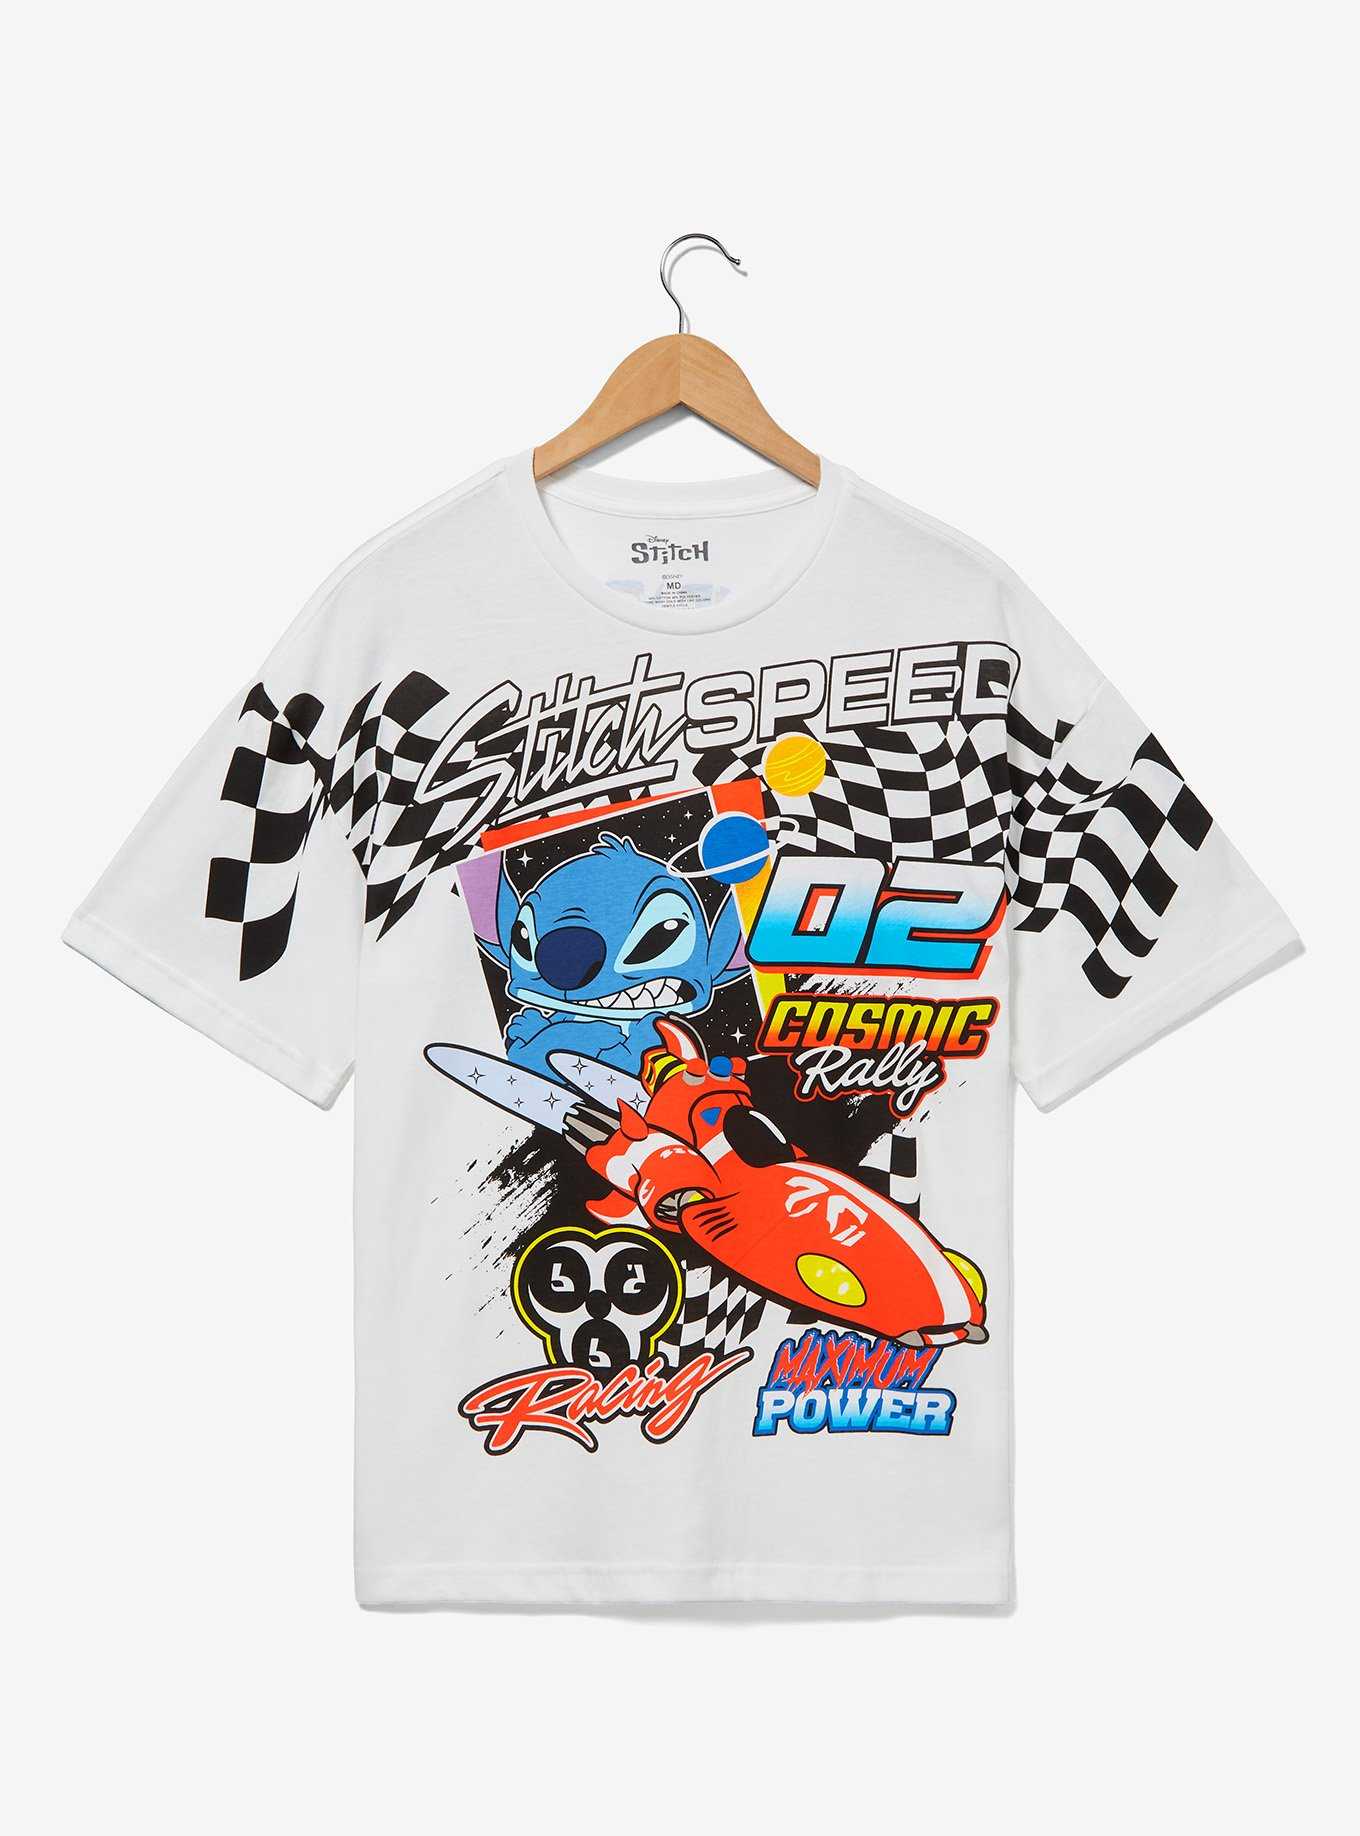 OFFICIAL Disney Graphic Tees & Shirts